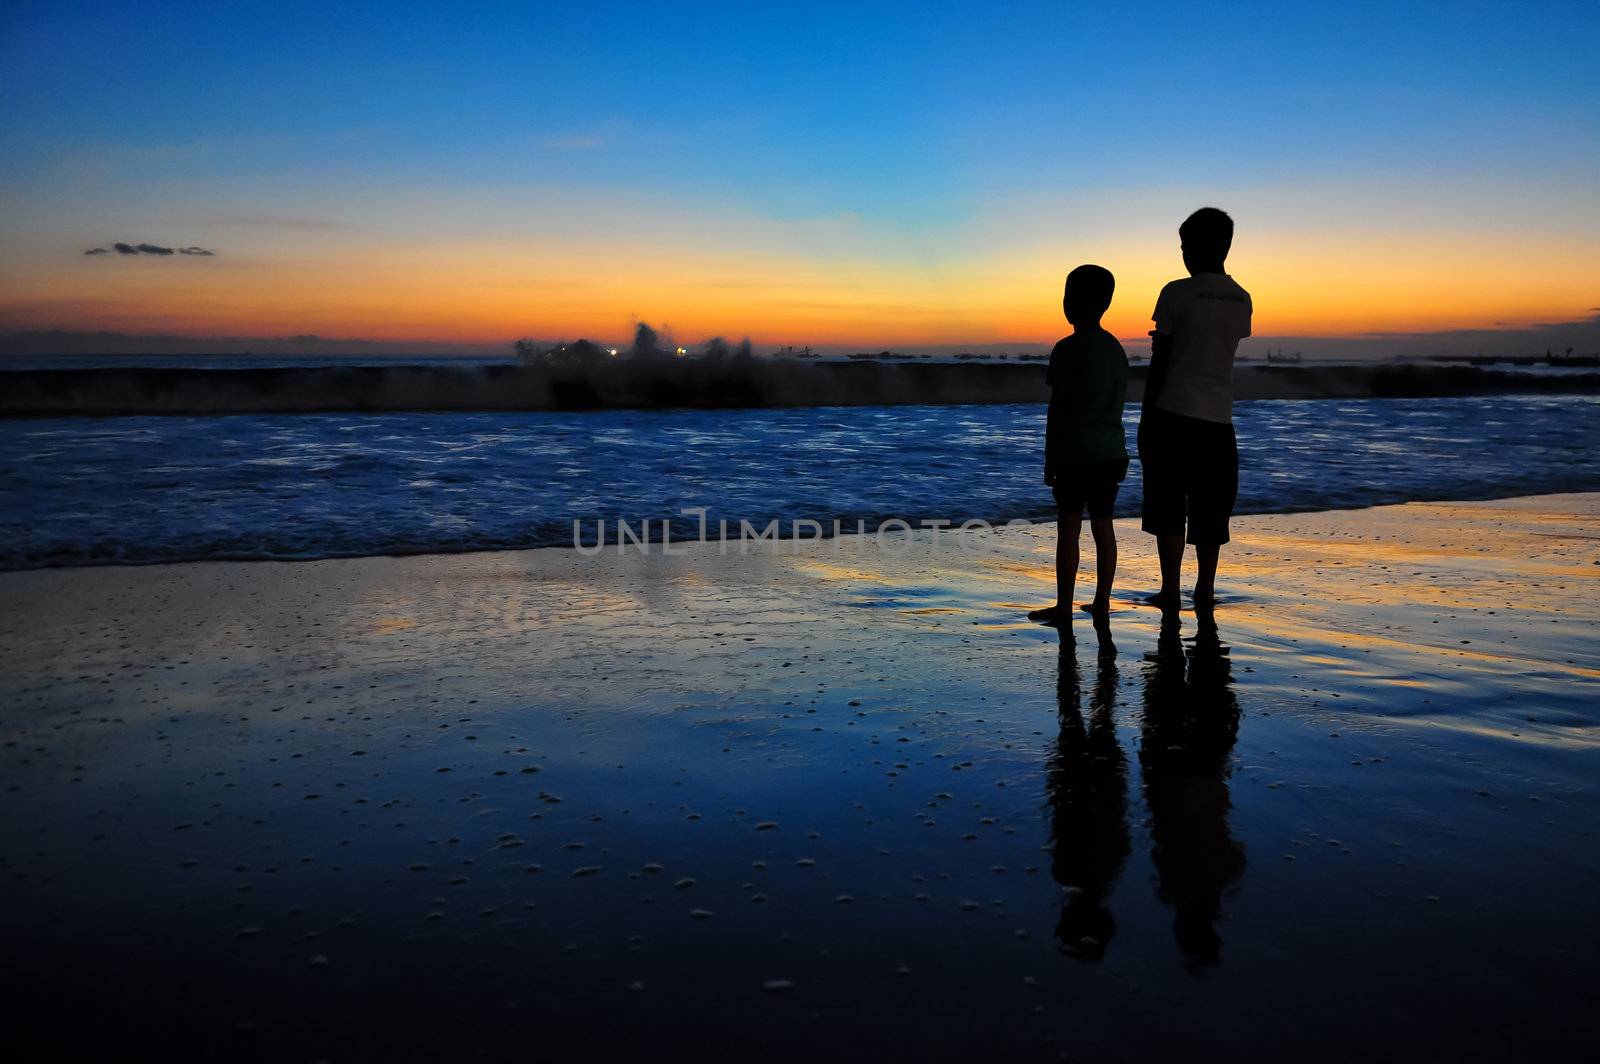 Two boys at ocean coast at sunset by martinm303